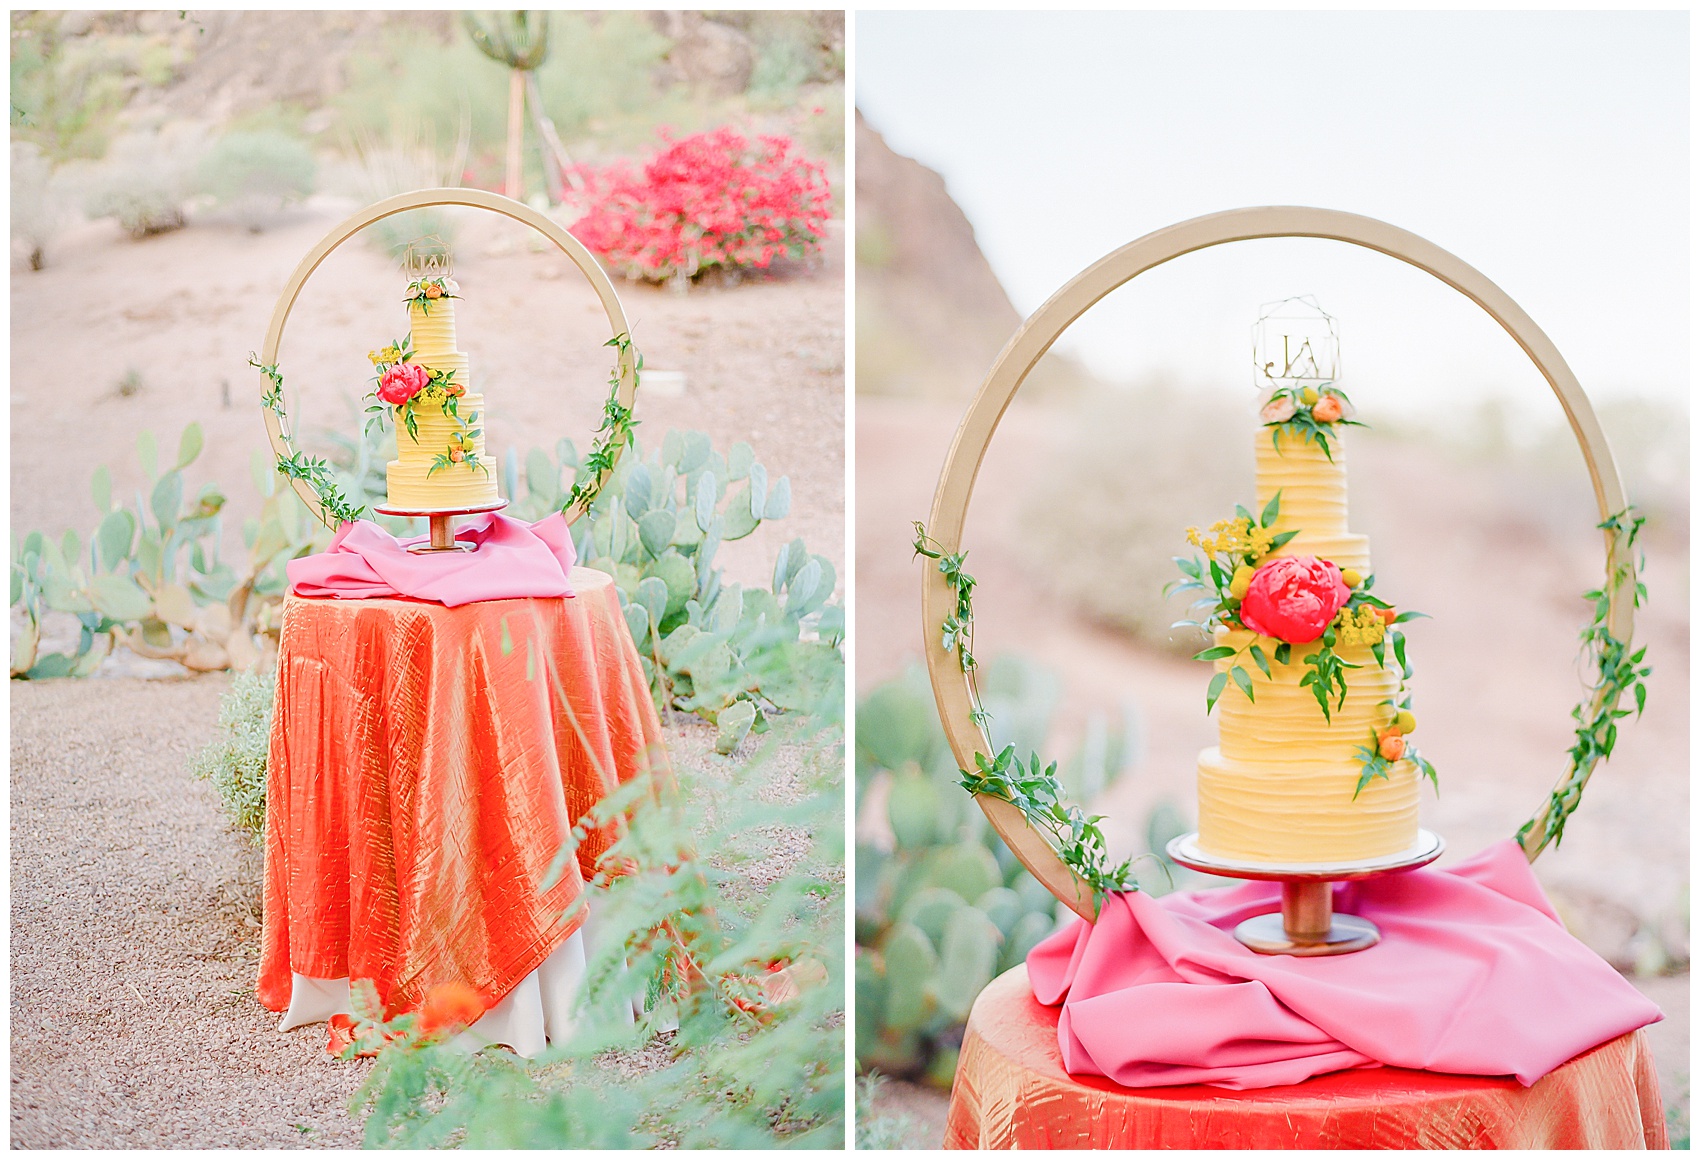 Bright and colorful yellow wedding cake inspiration